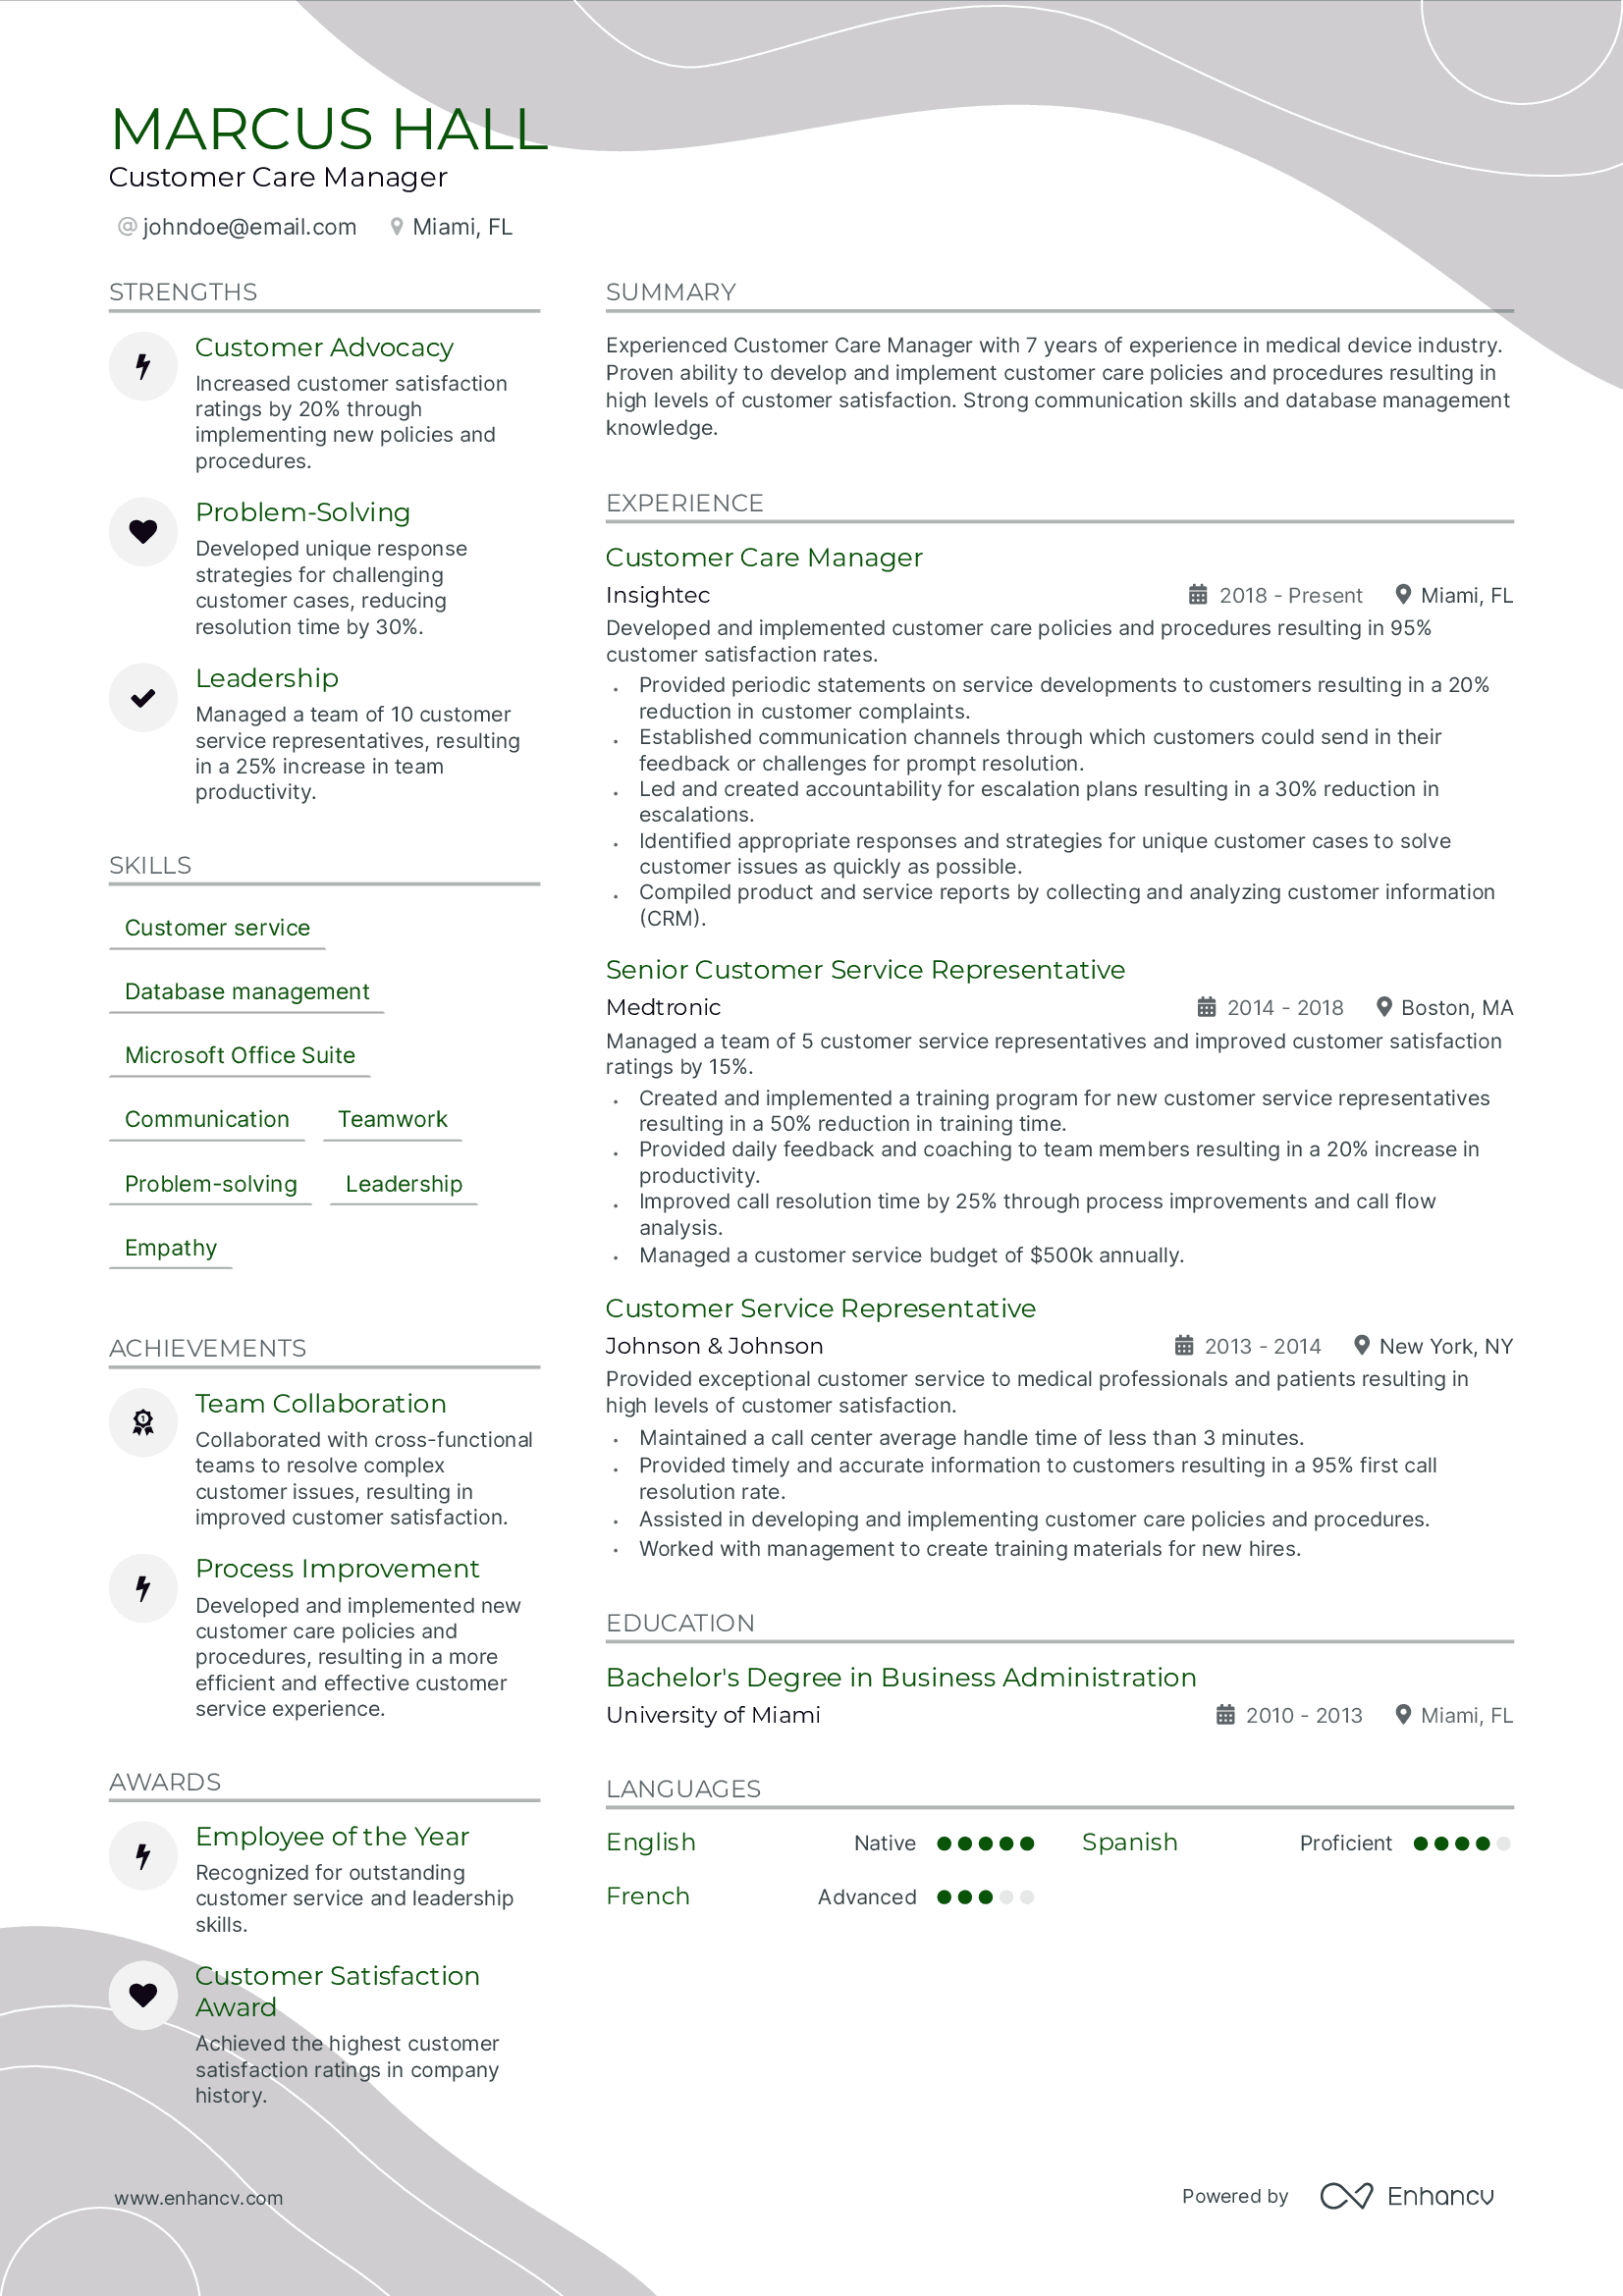 Customer Care Manager resume example